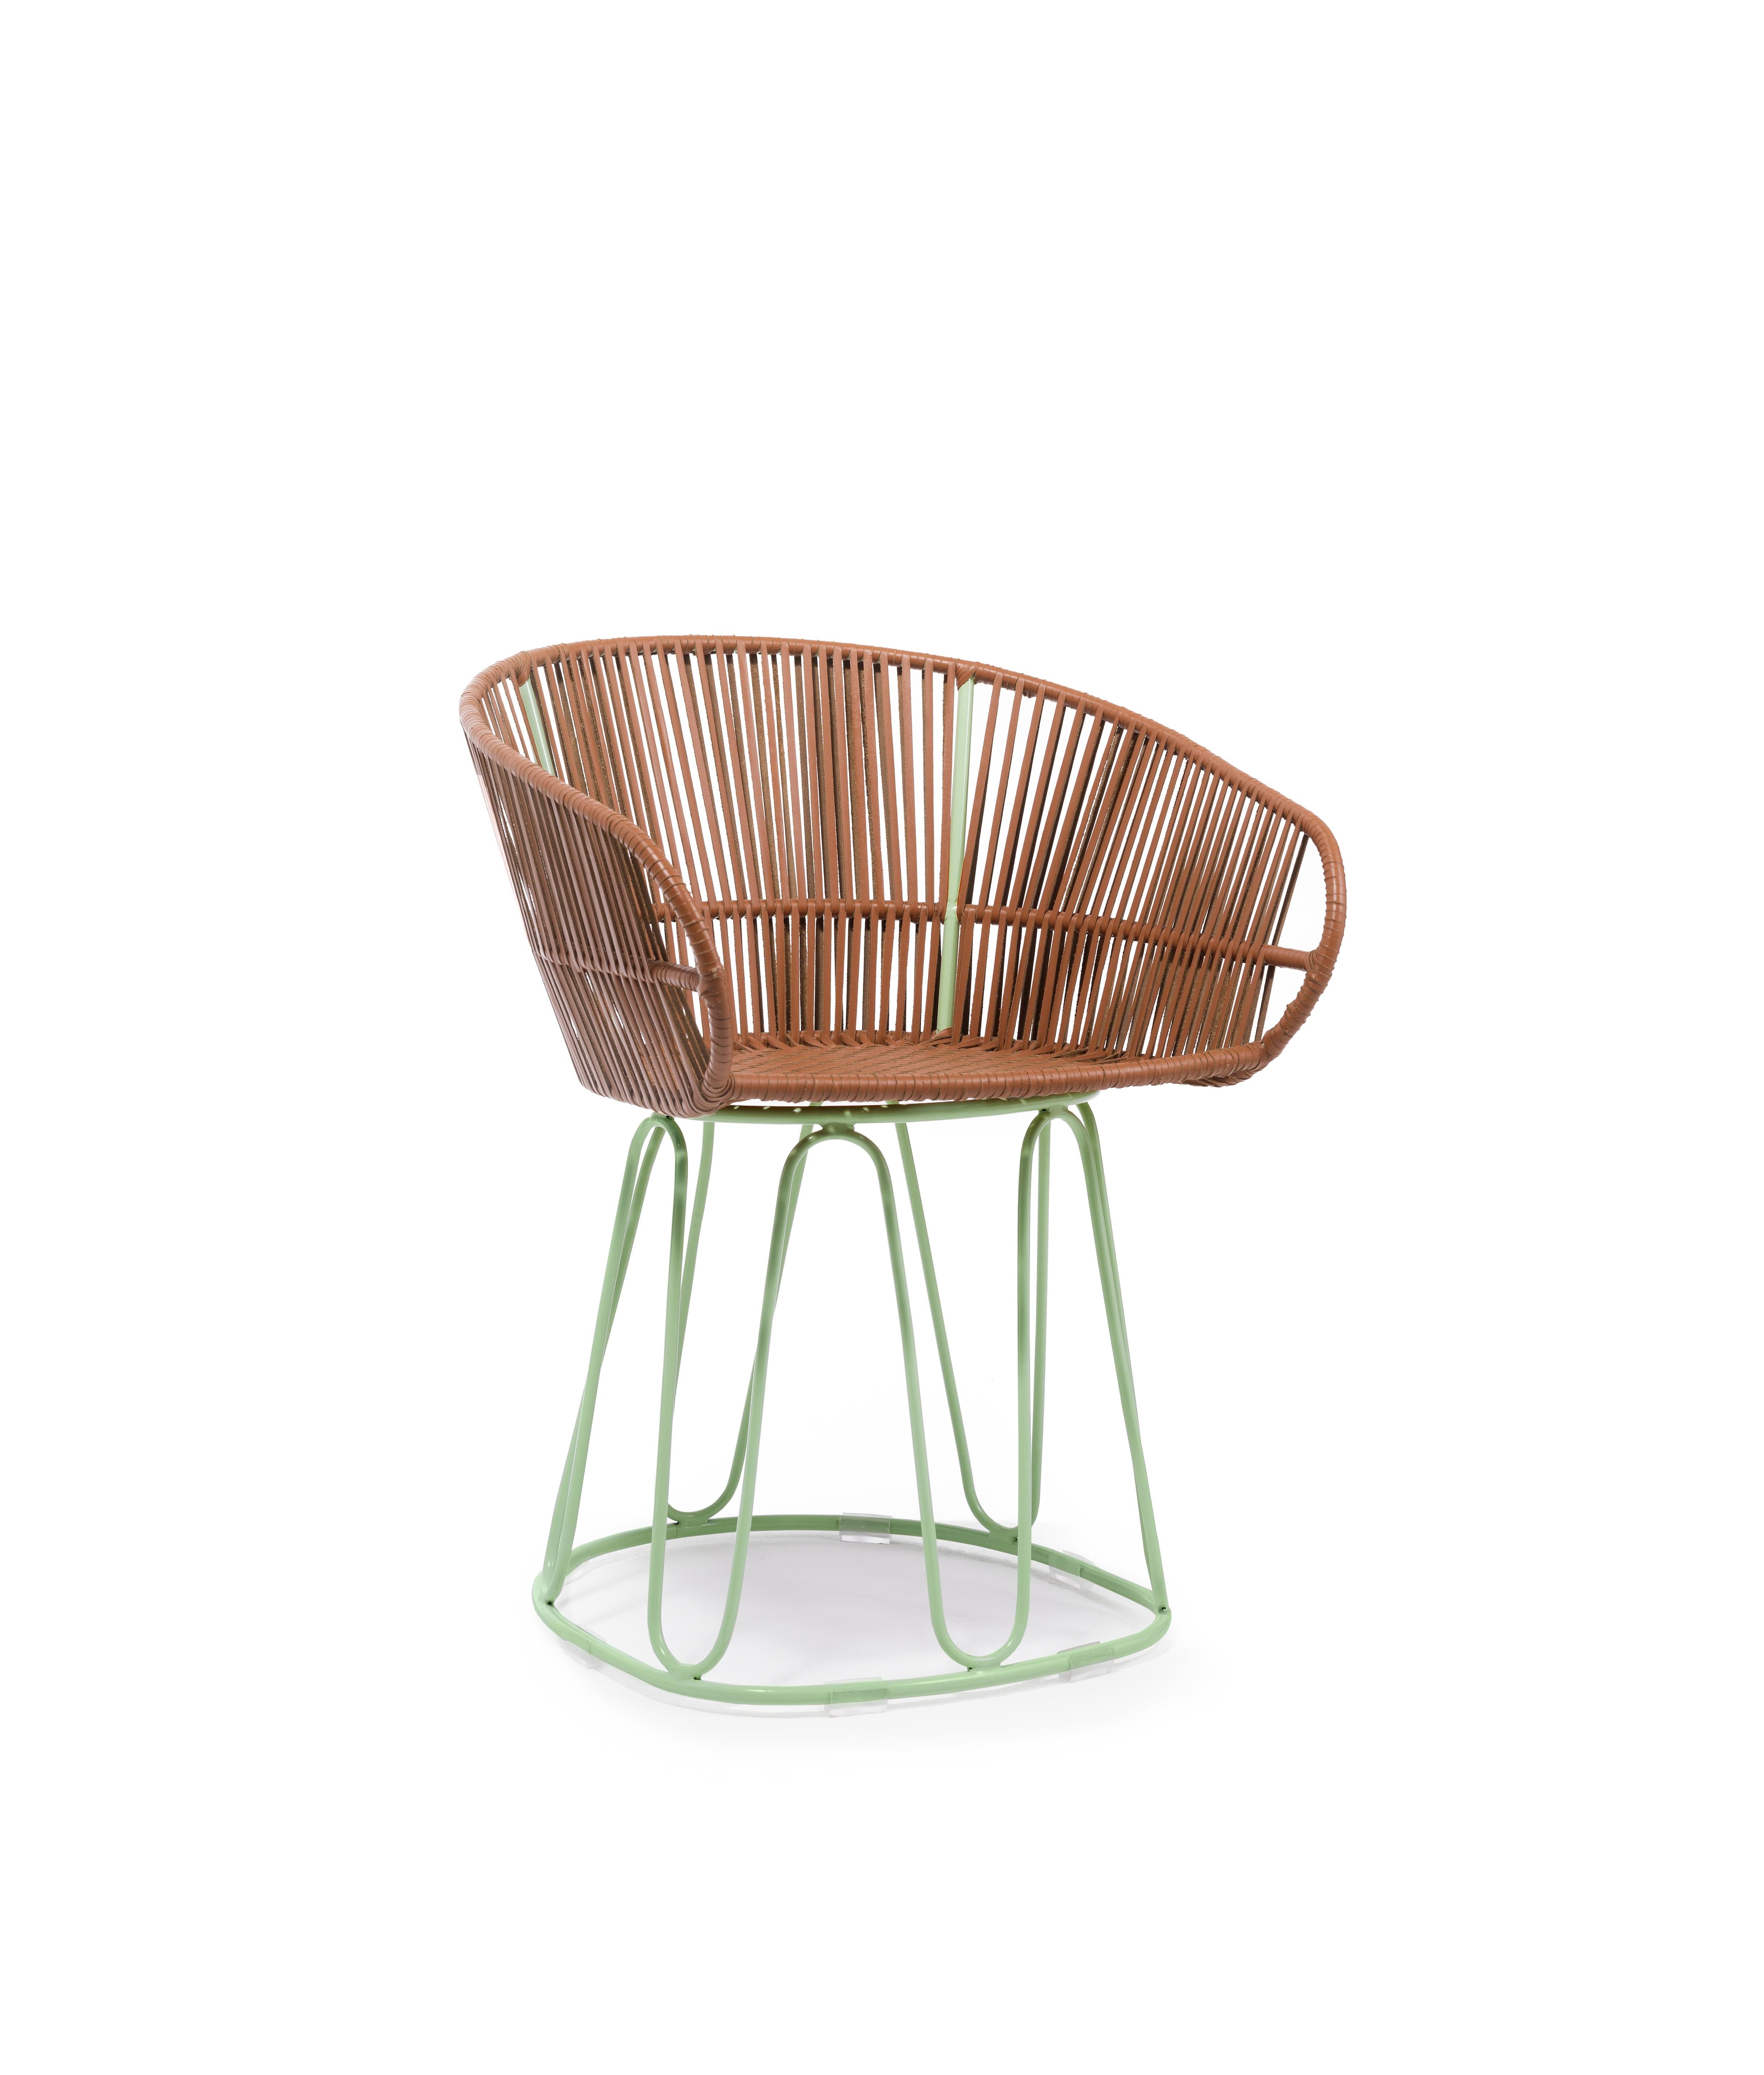 Powder-Coated Circo Dining Chair Leather by Sebastian Herkner